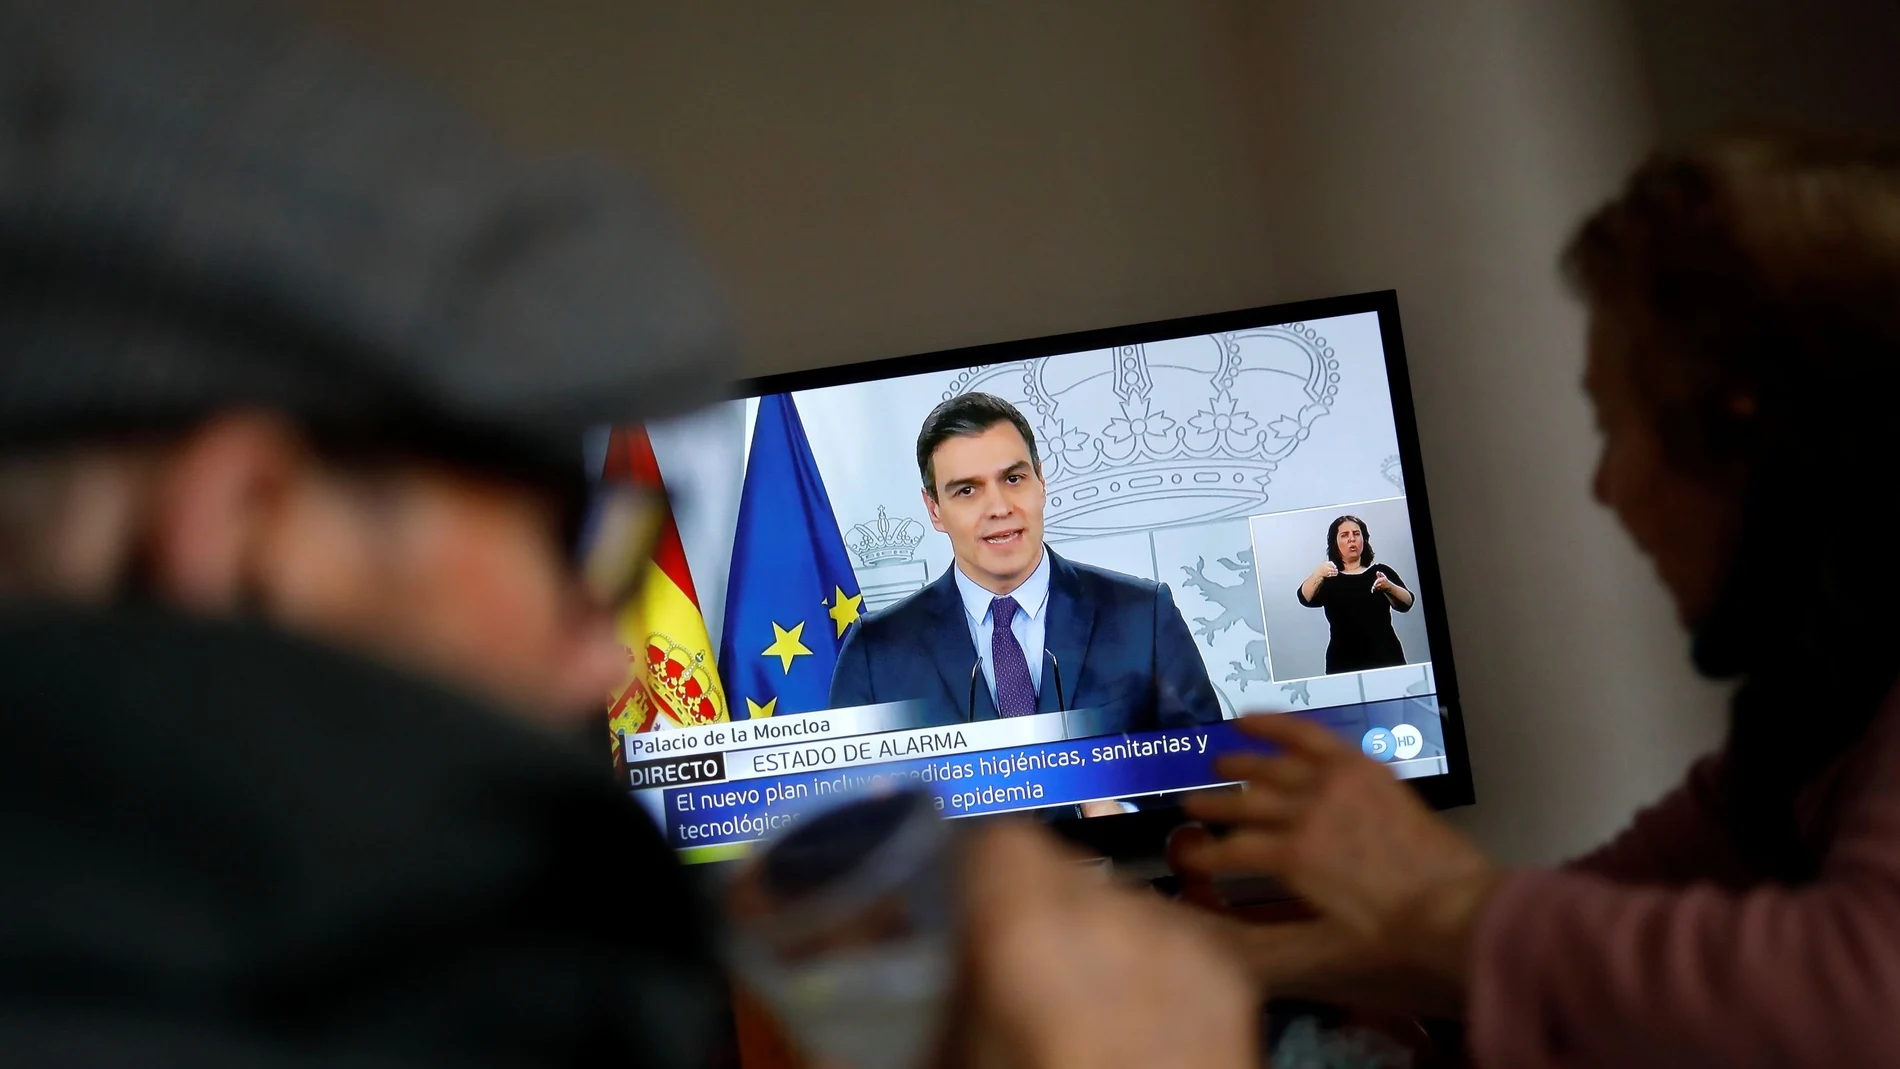 An elderly couple eats lunch at their home as they watch Spanish Prime Minister Pedro Sanchez on a television screen during a live news conference, due to the coronavirus disease (COVID-19) outbreak, in Ronda, southern Spain April 4, 2020. REUTERS/Jon Nazca